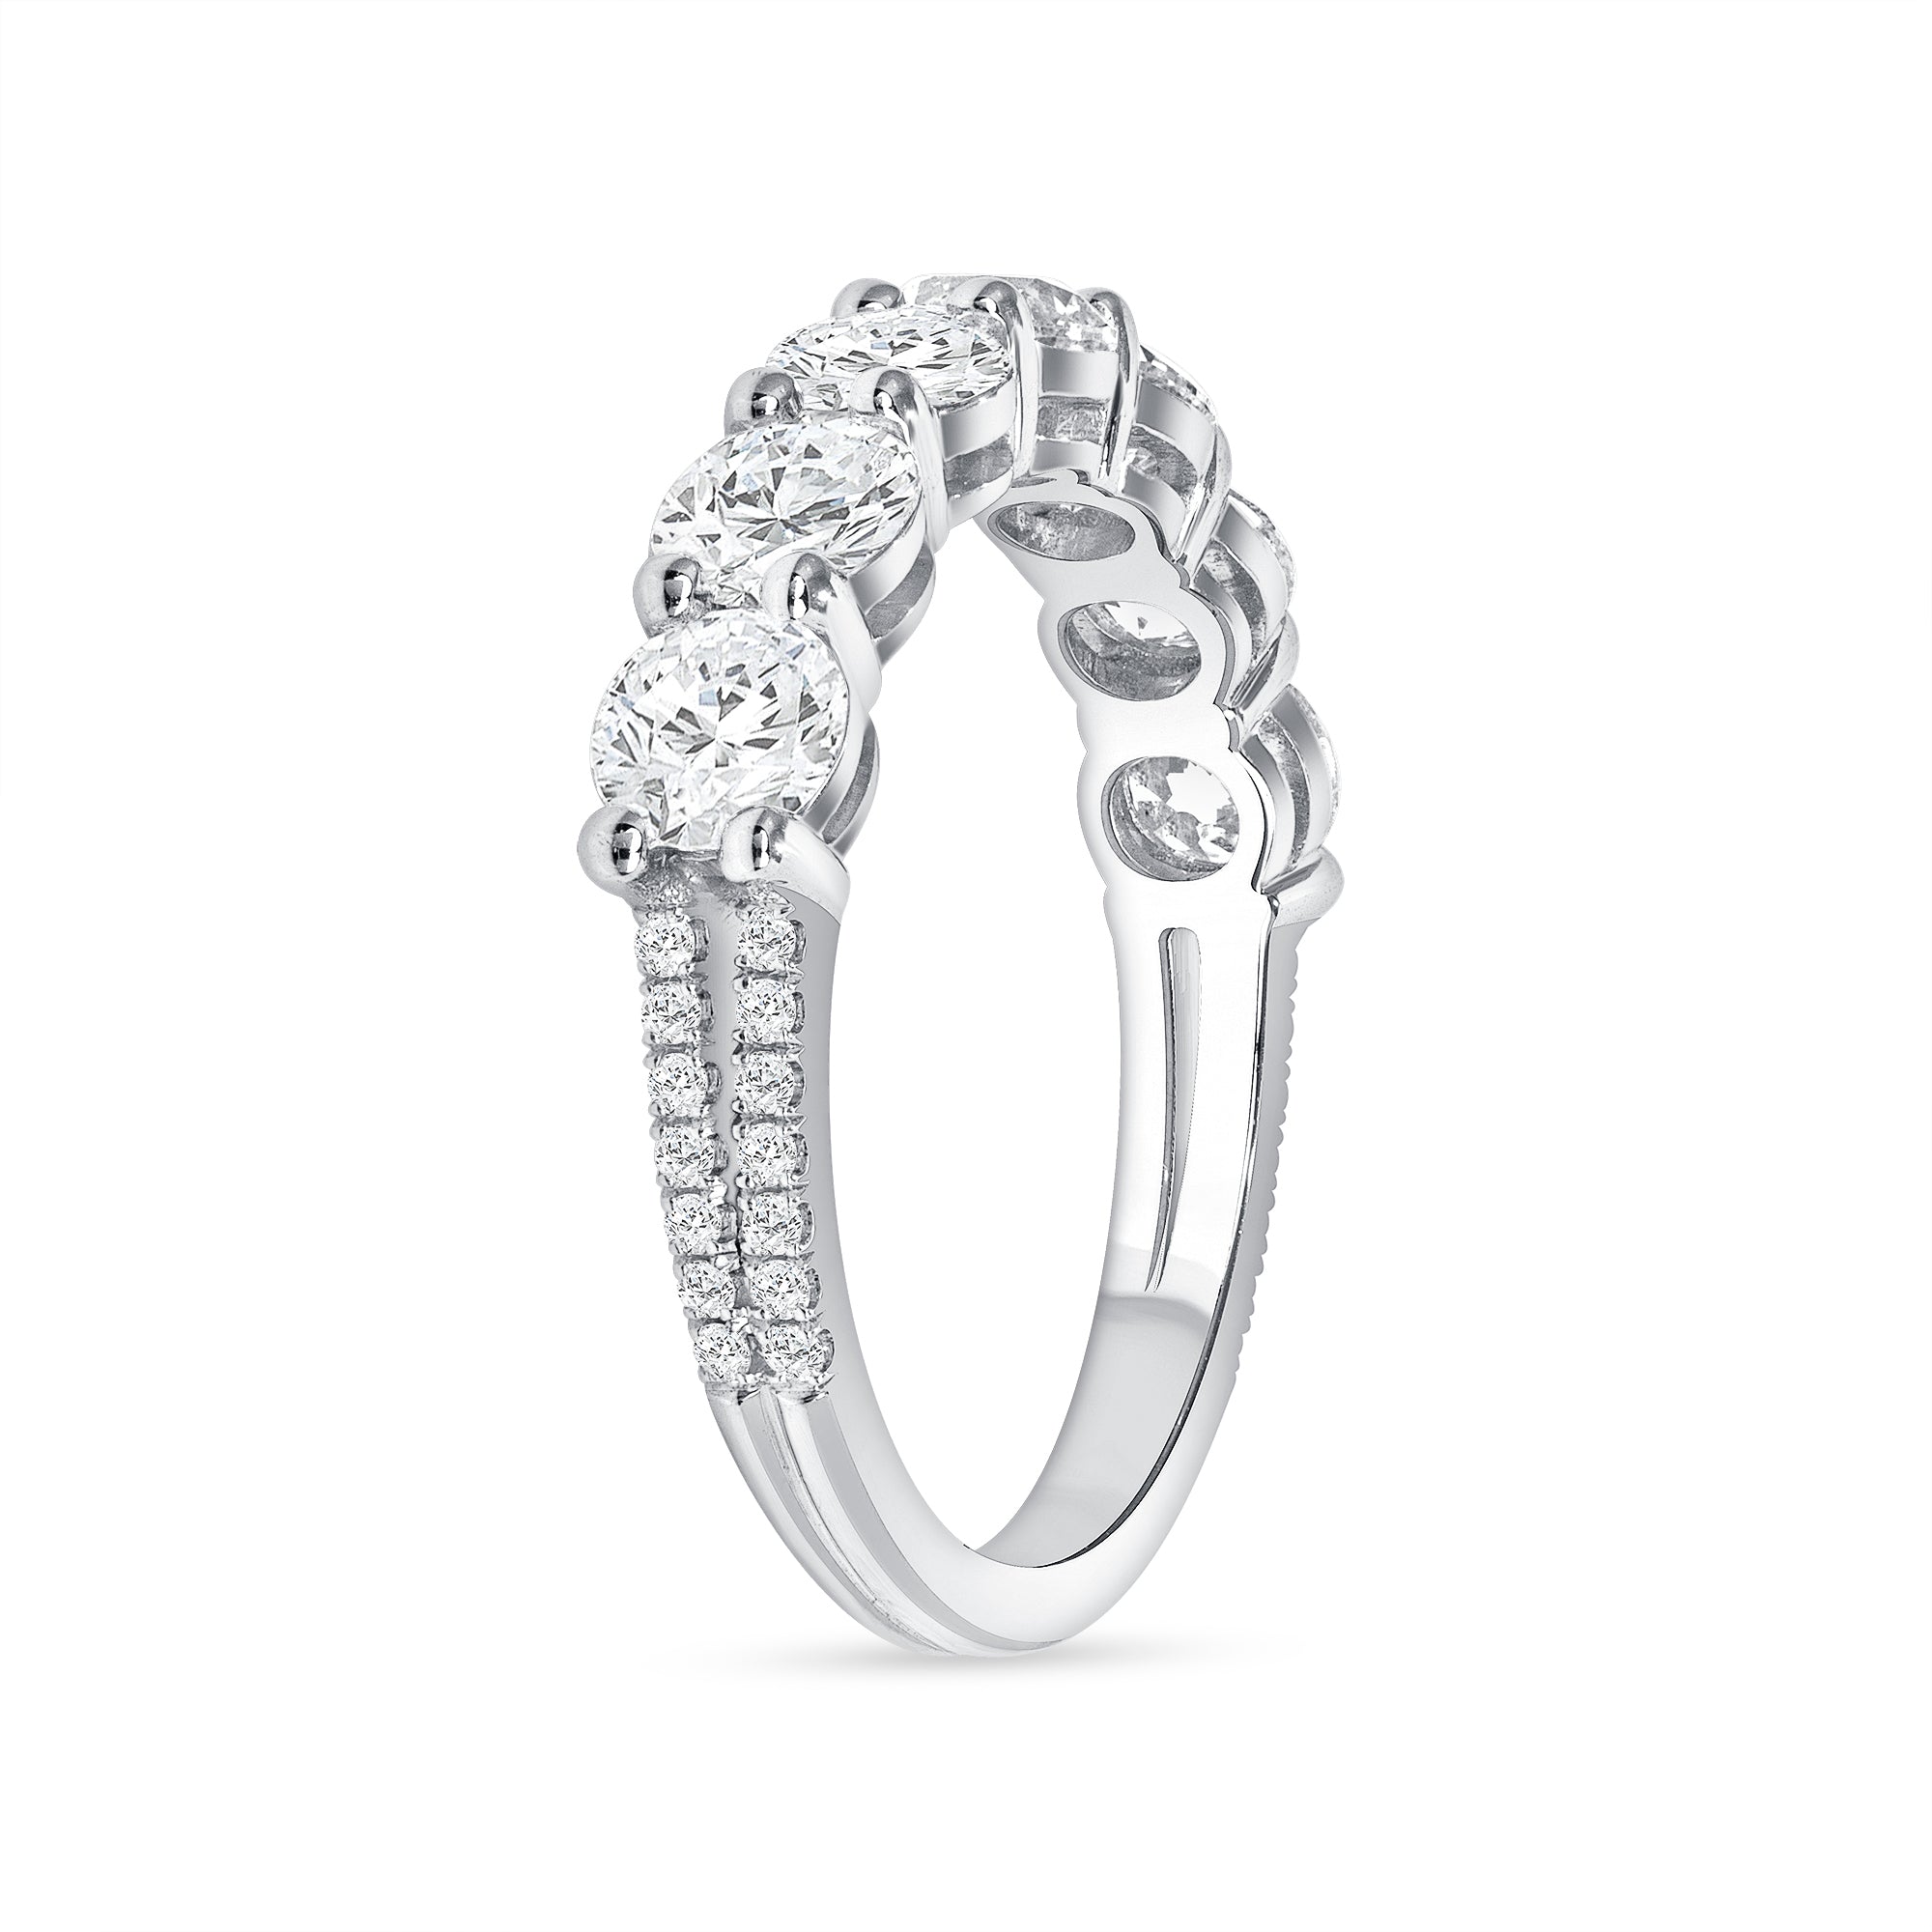 7 Round Brilliant Cut Diamond 18k White Gold Ring with Pave